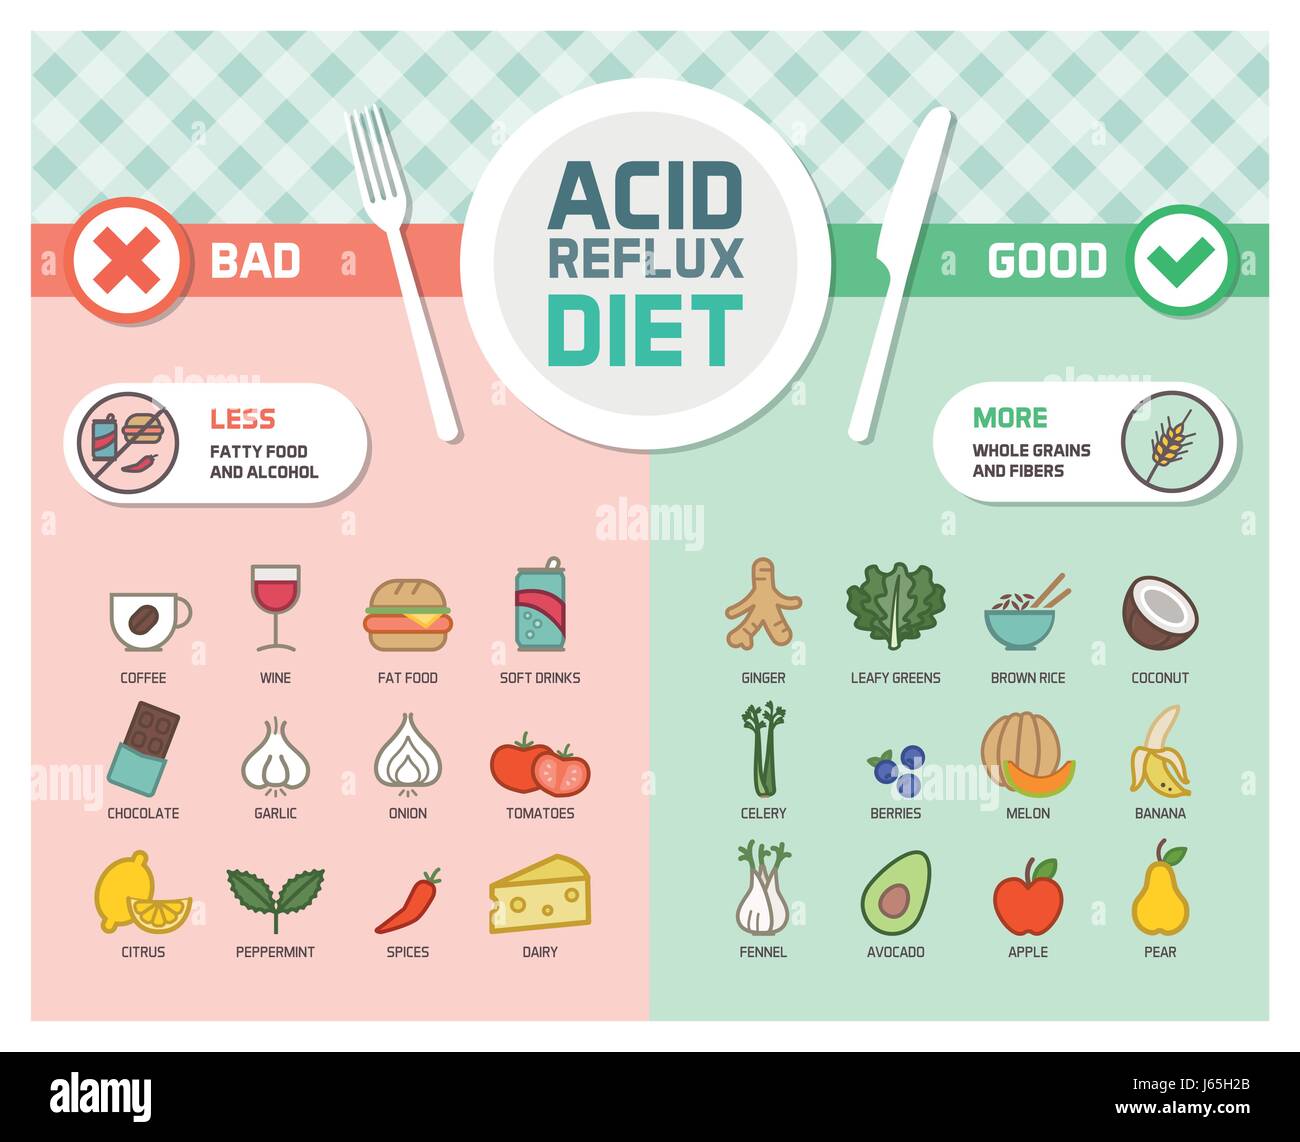 Acid reflux and gerd symptoms prevention diet with trigger foods and anti-inflammatory healthy food Stock Vector